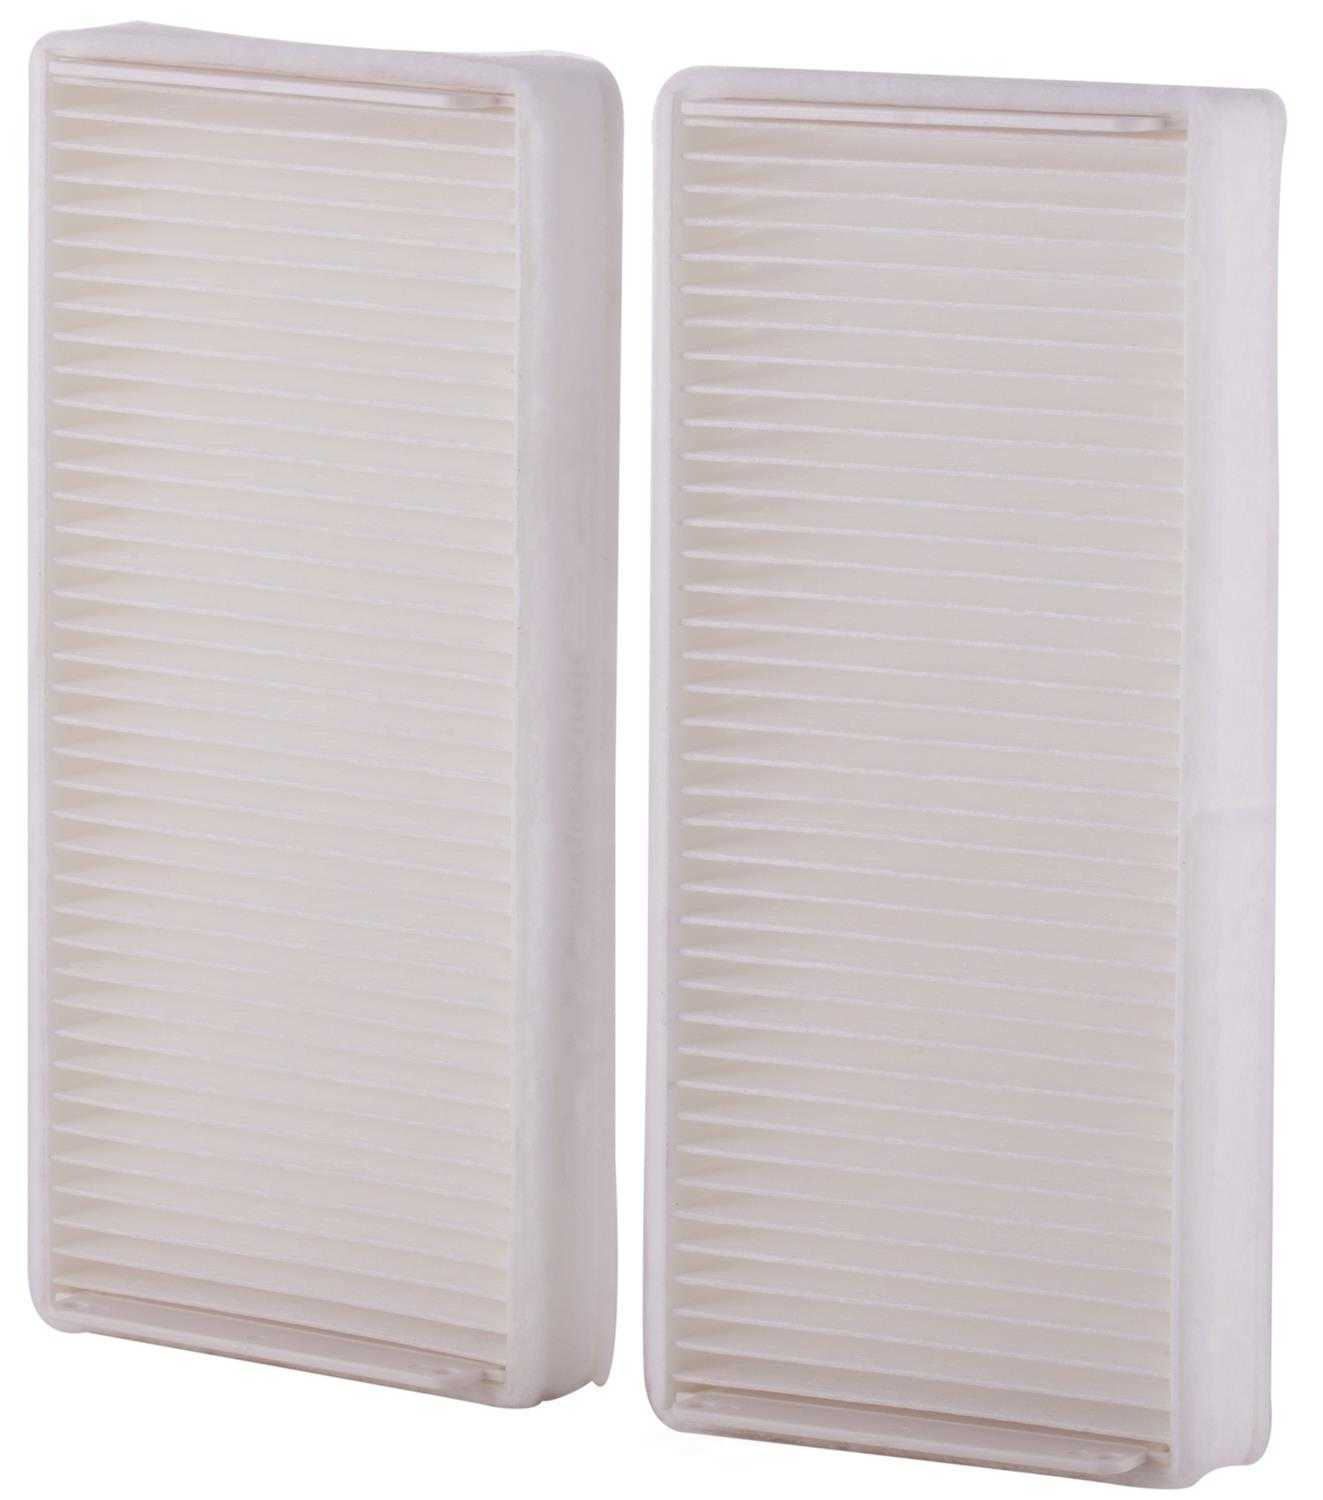 PARTS PLUS FILTERS BY PREMIUM GUARD - Particulate Media (Fresh Air) - PLF CAF8153